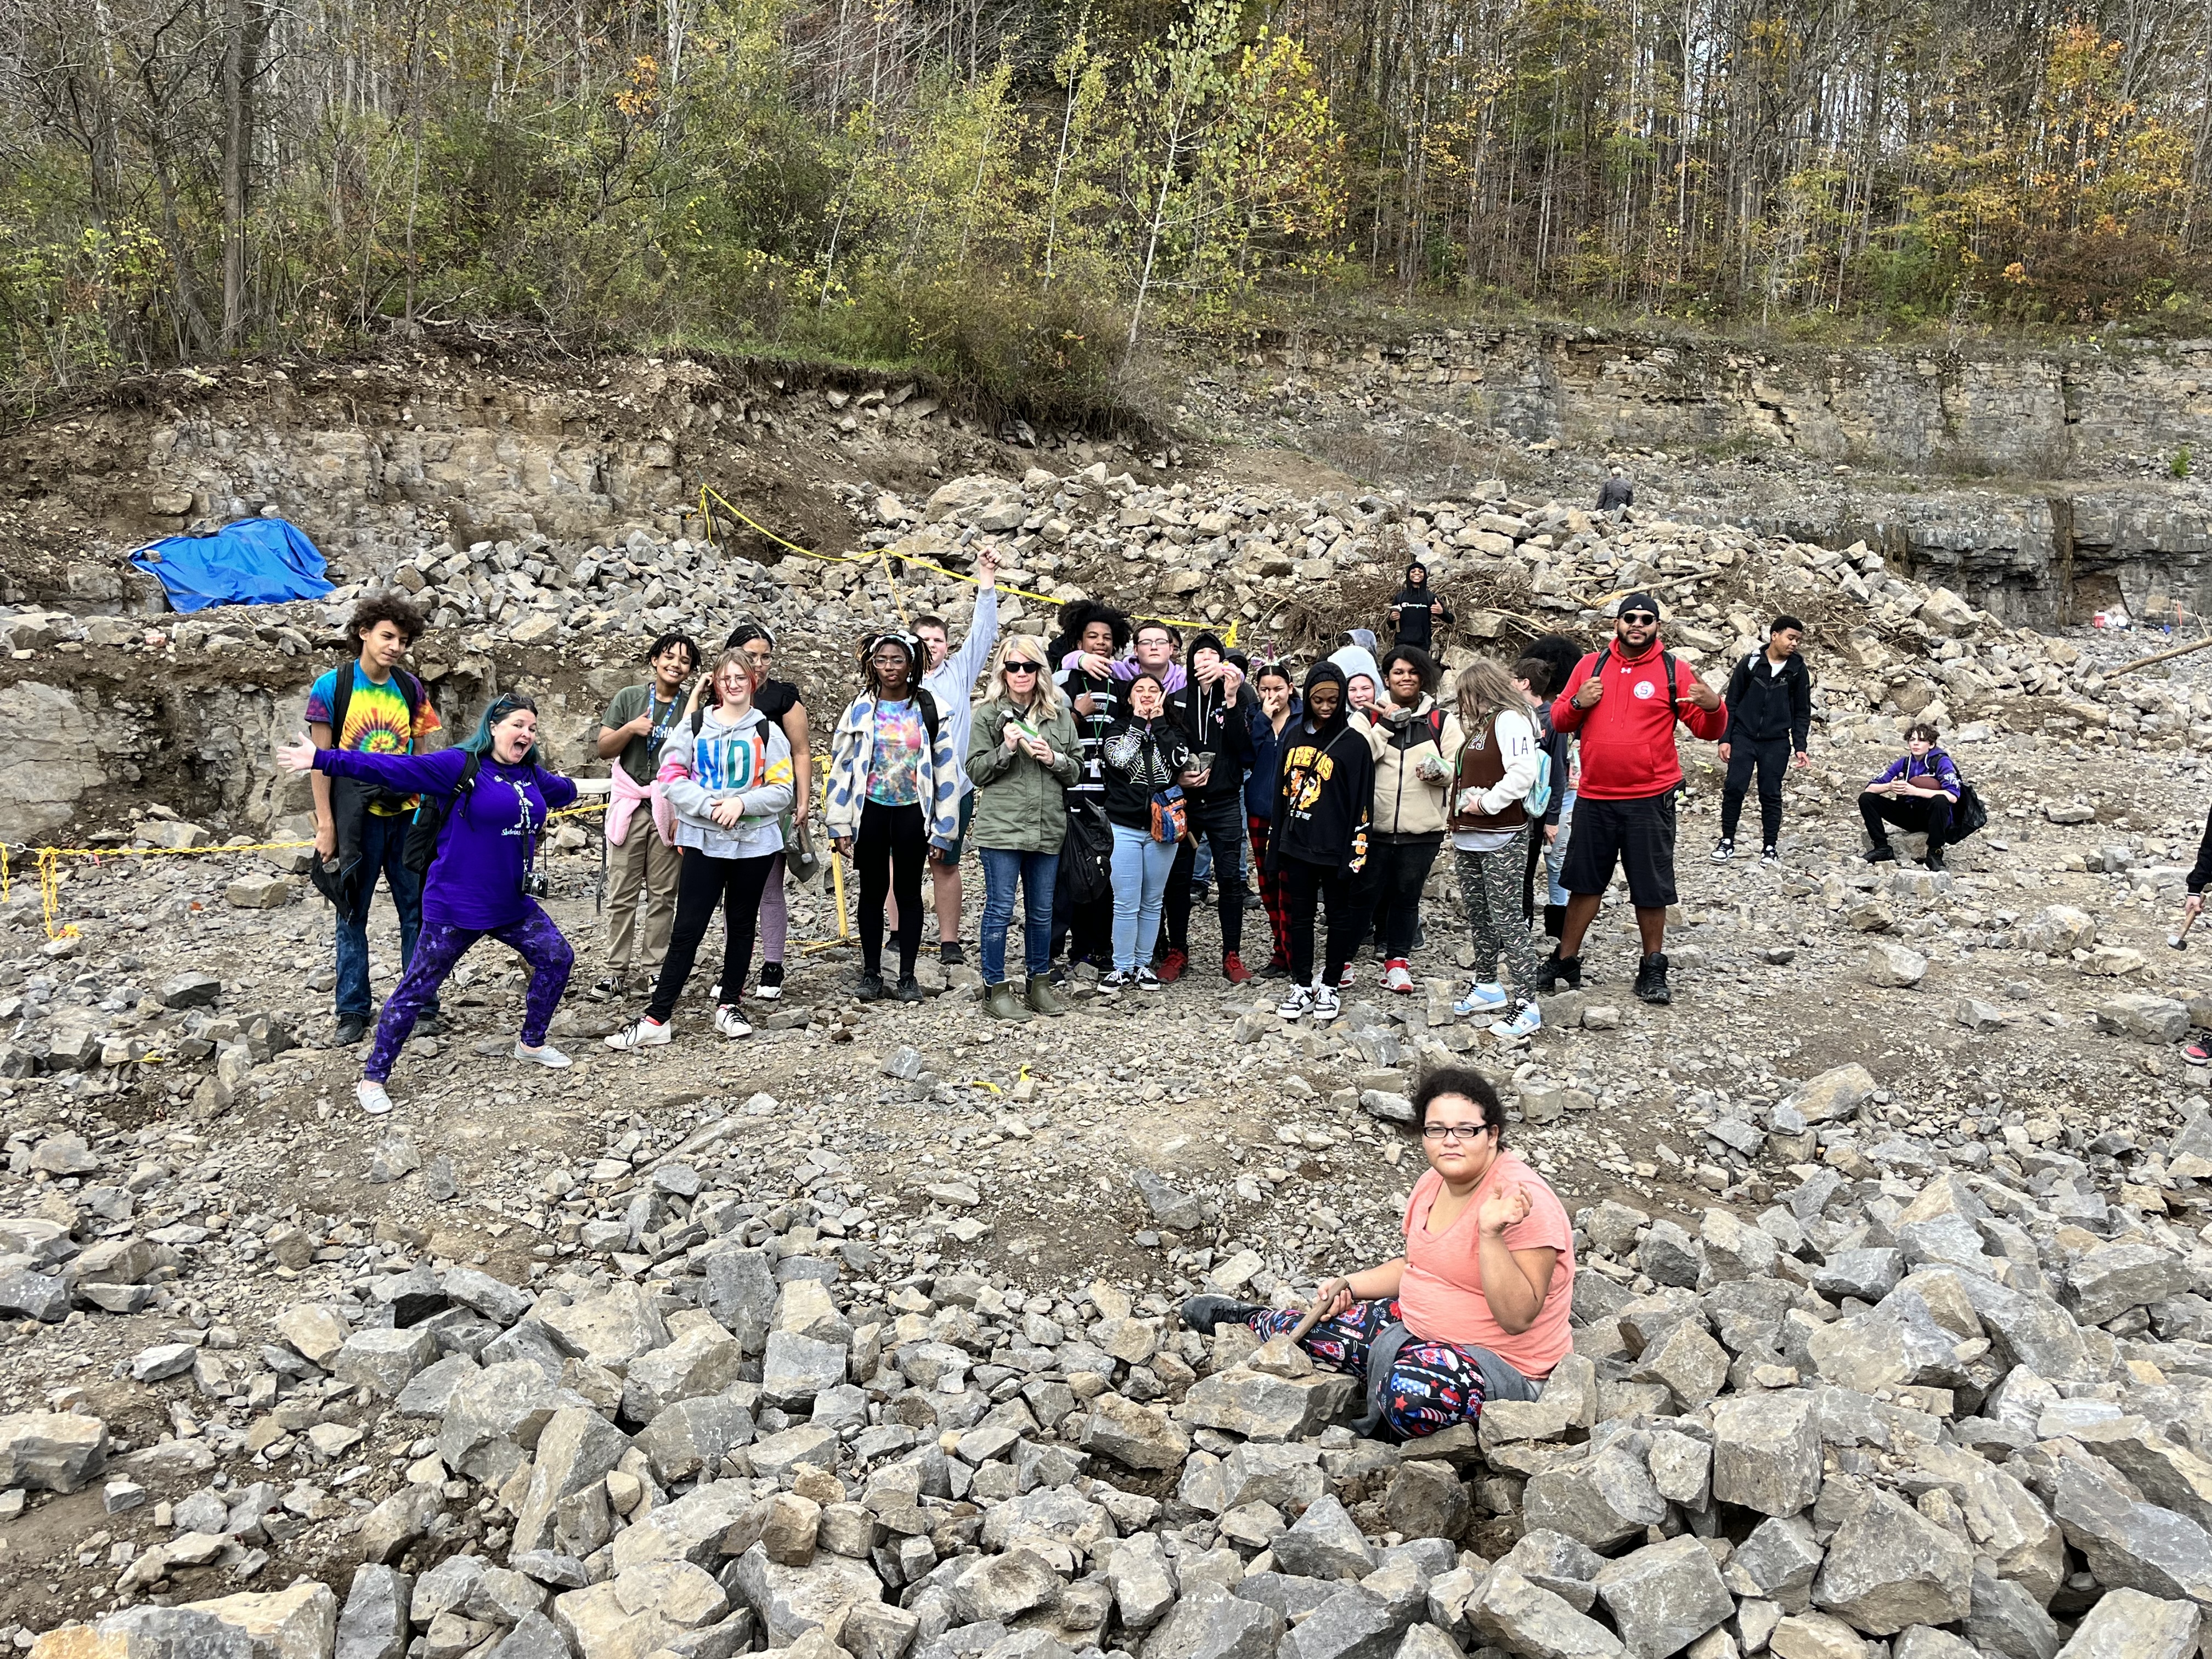 Group photo in the quarry